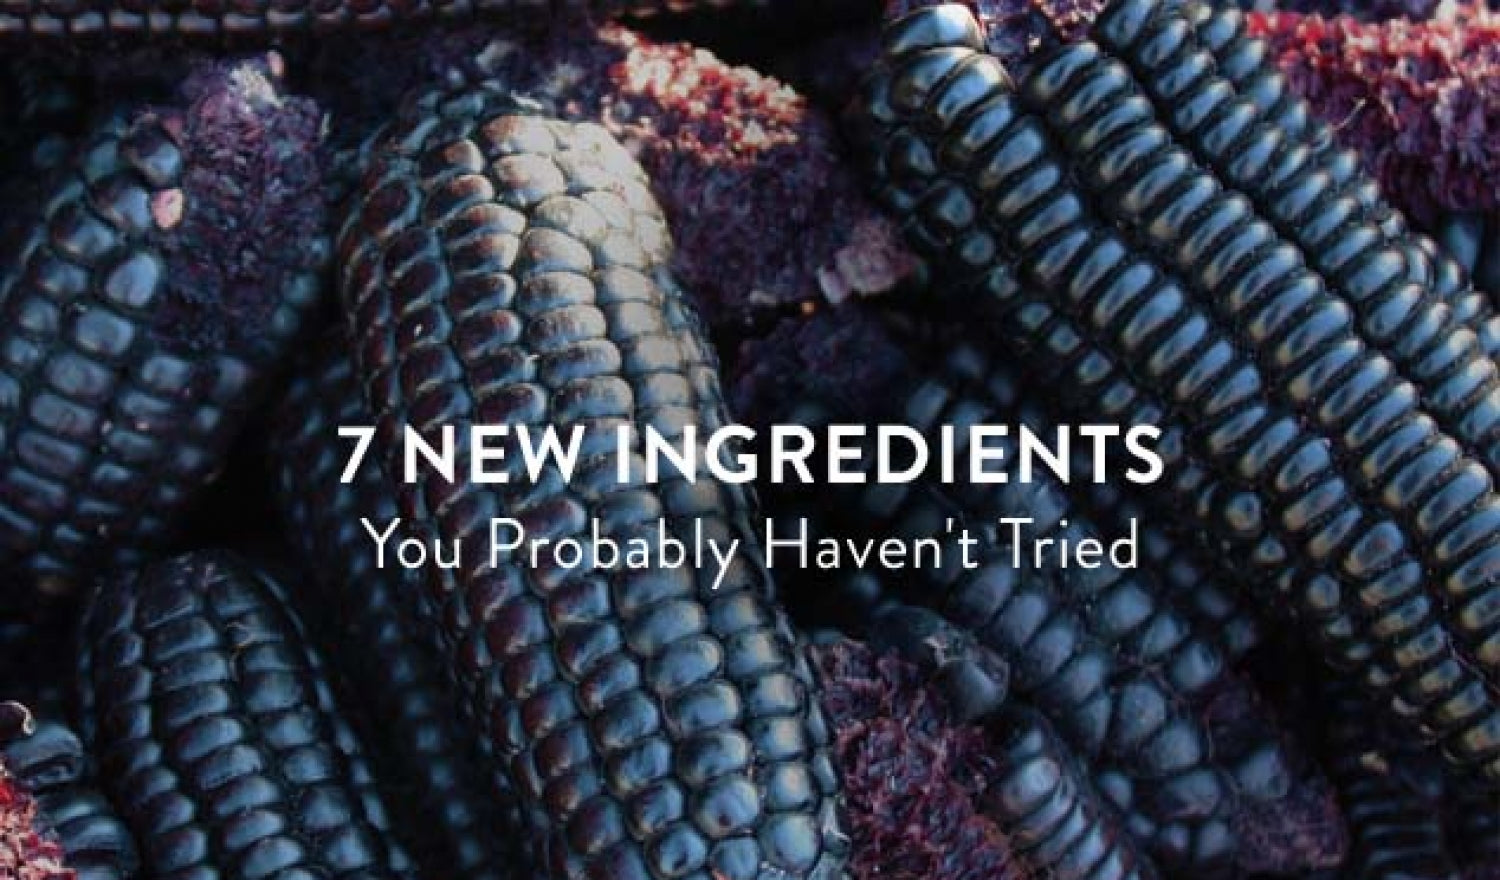 6 New Ingredients You Probably Haven't Tried